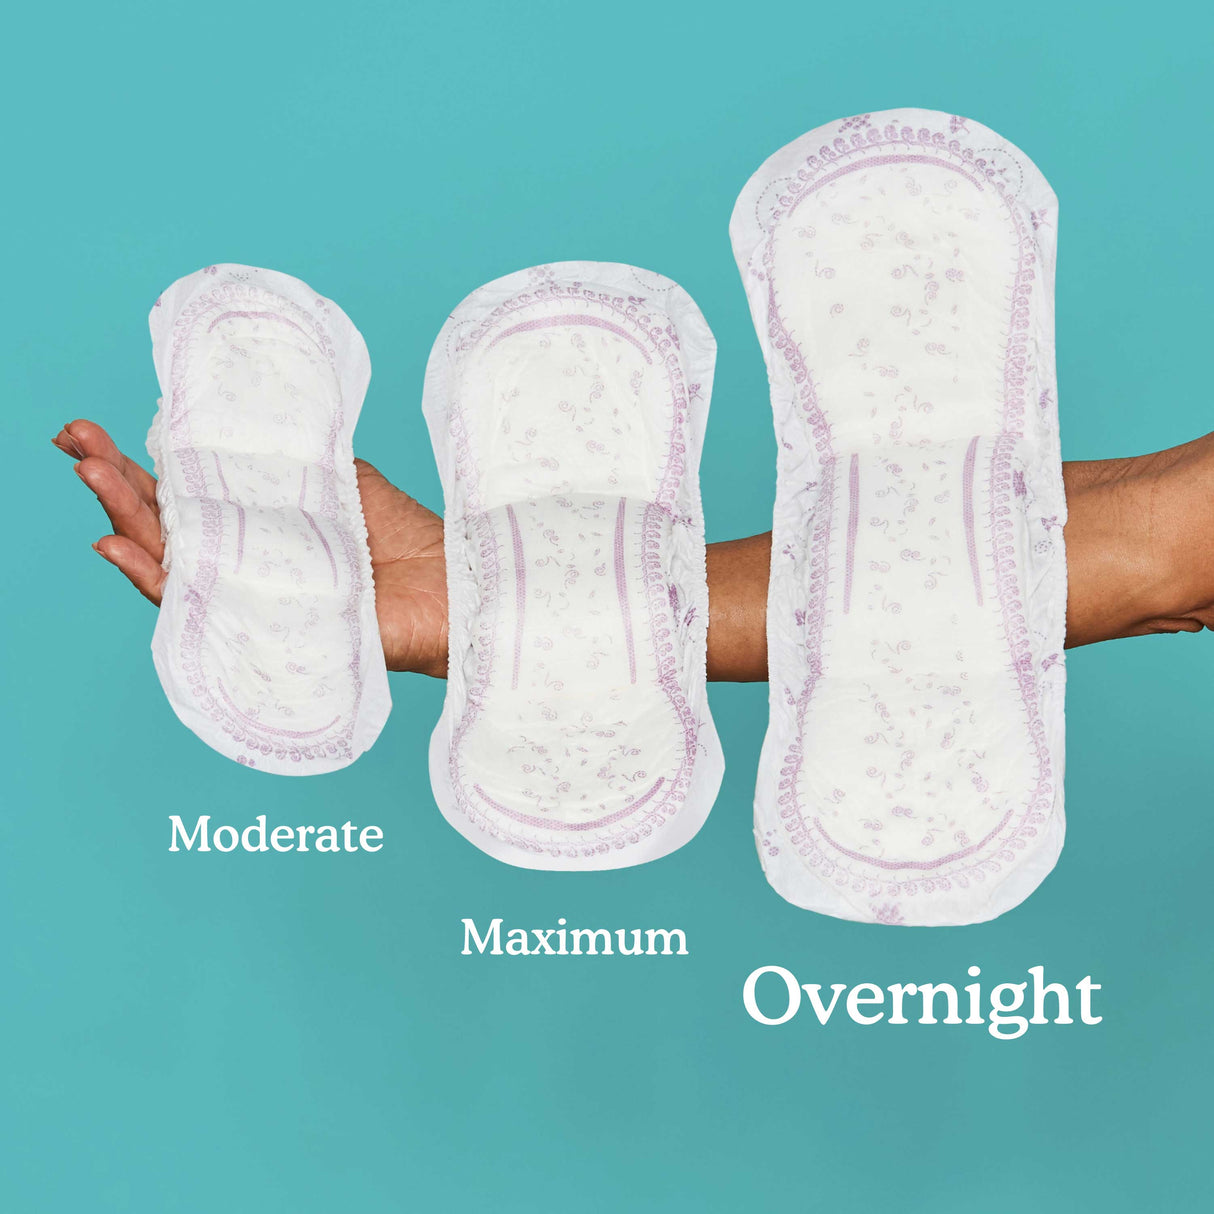 A woman holding a moderate, maximum, and overnight pad in her arm with the overnight pad being the largest